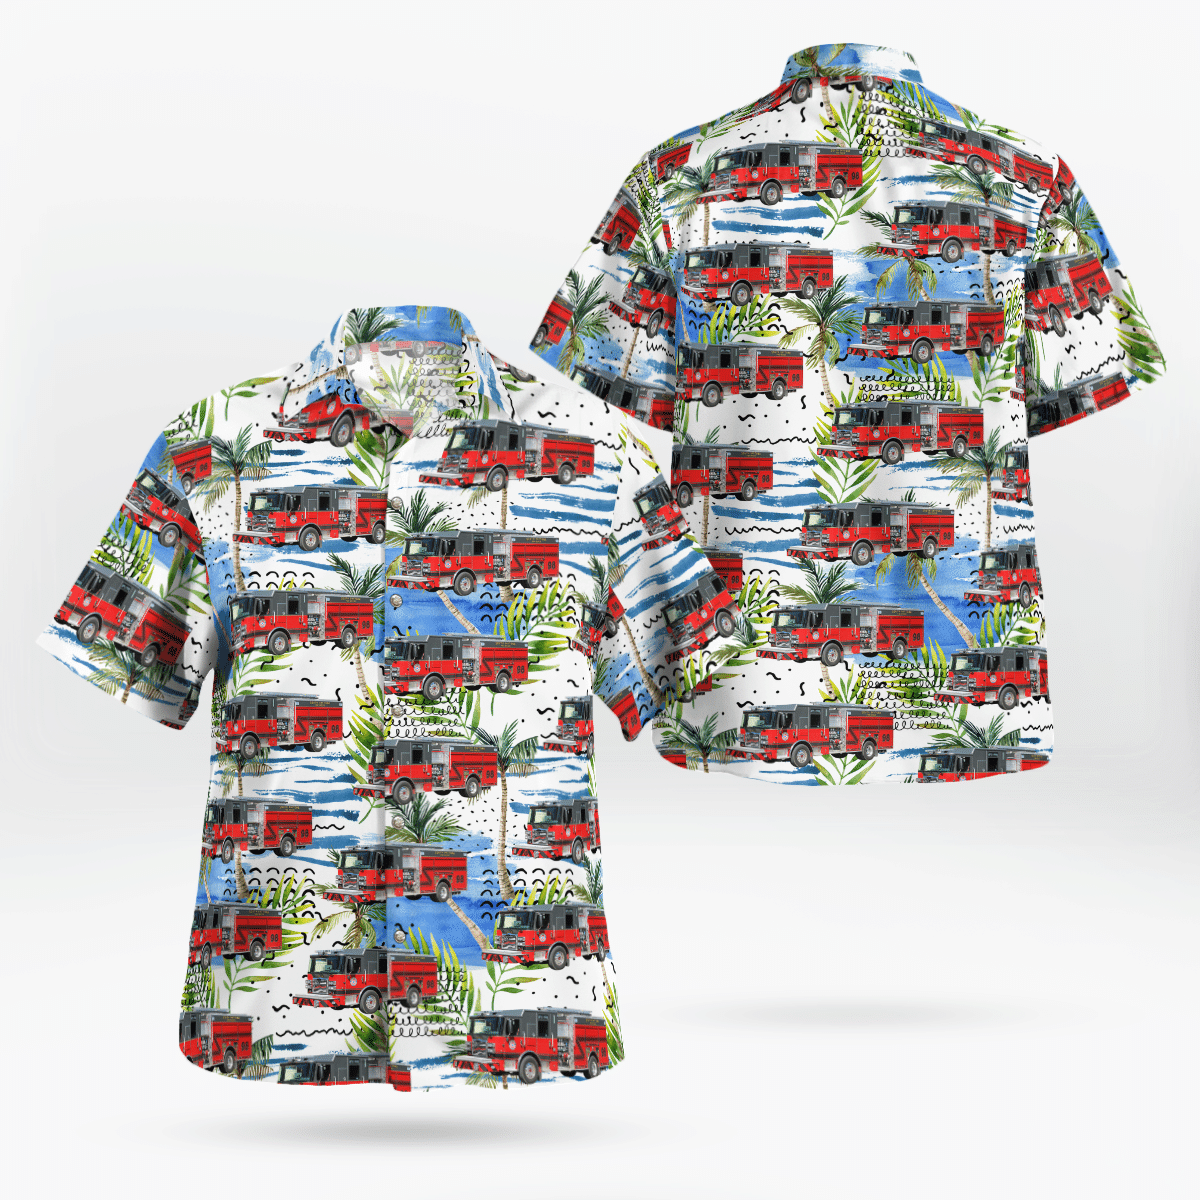 If you are in need of a new summertime look, pick up this Hawaiian shirt 146